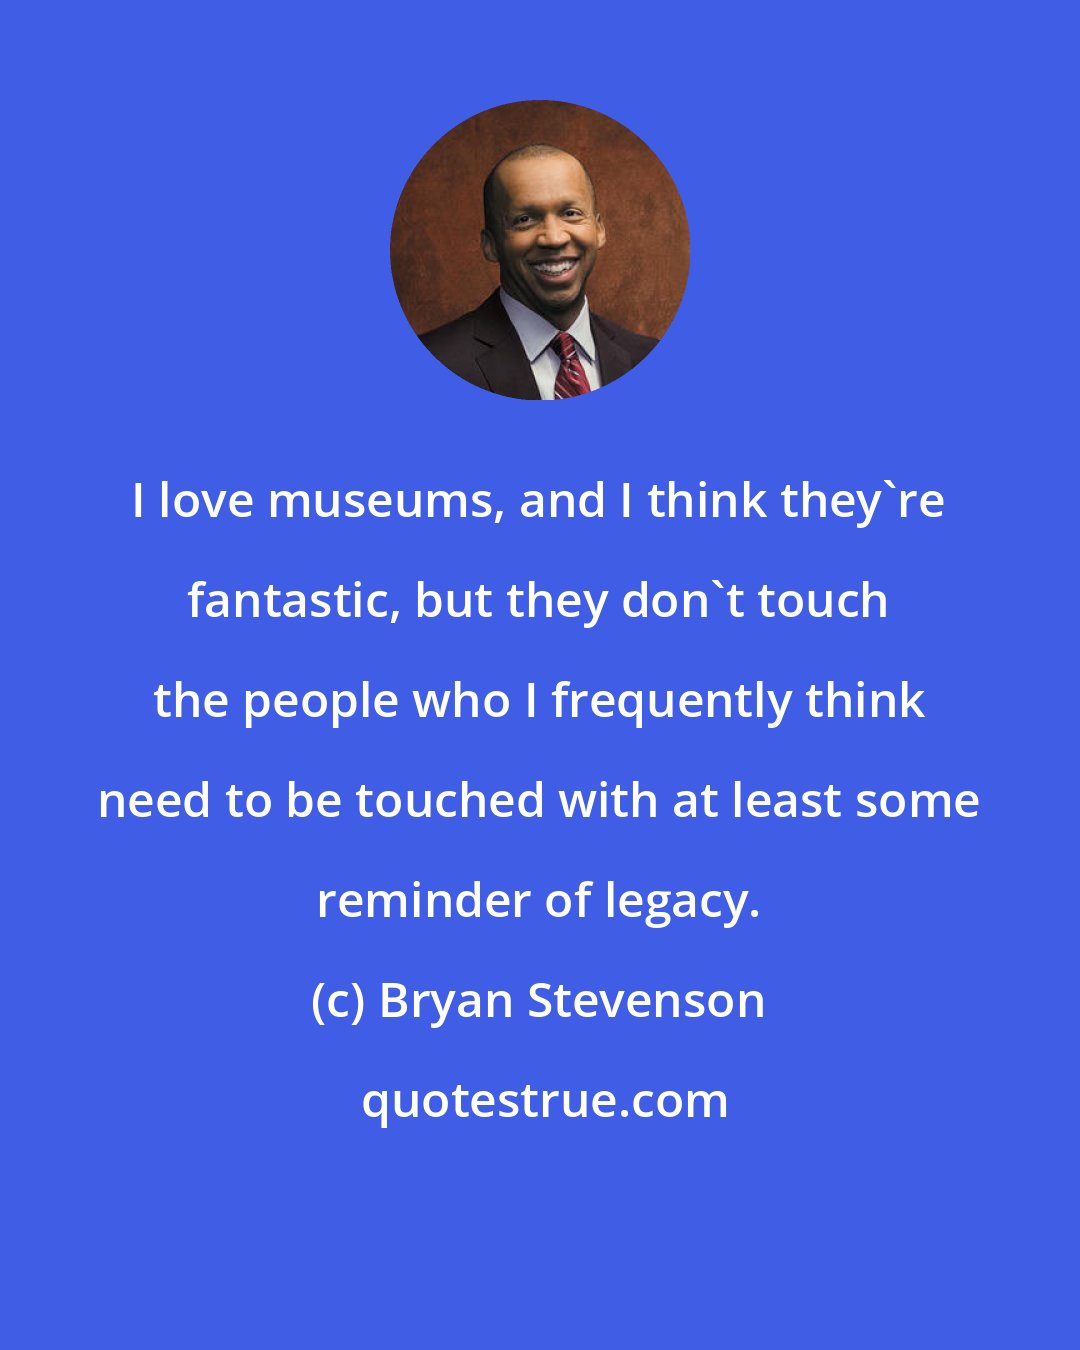 Bryan Stevenson: I love museums, and I think they're fantastic, but they don't touch the people who I frequently think need to be touched with at least some reminder of legacy.